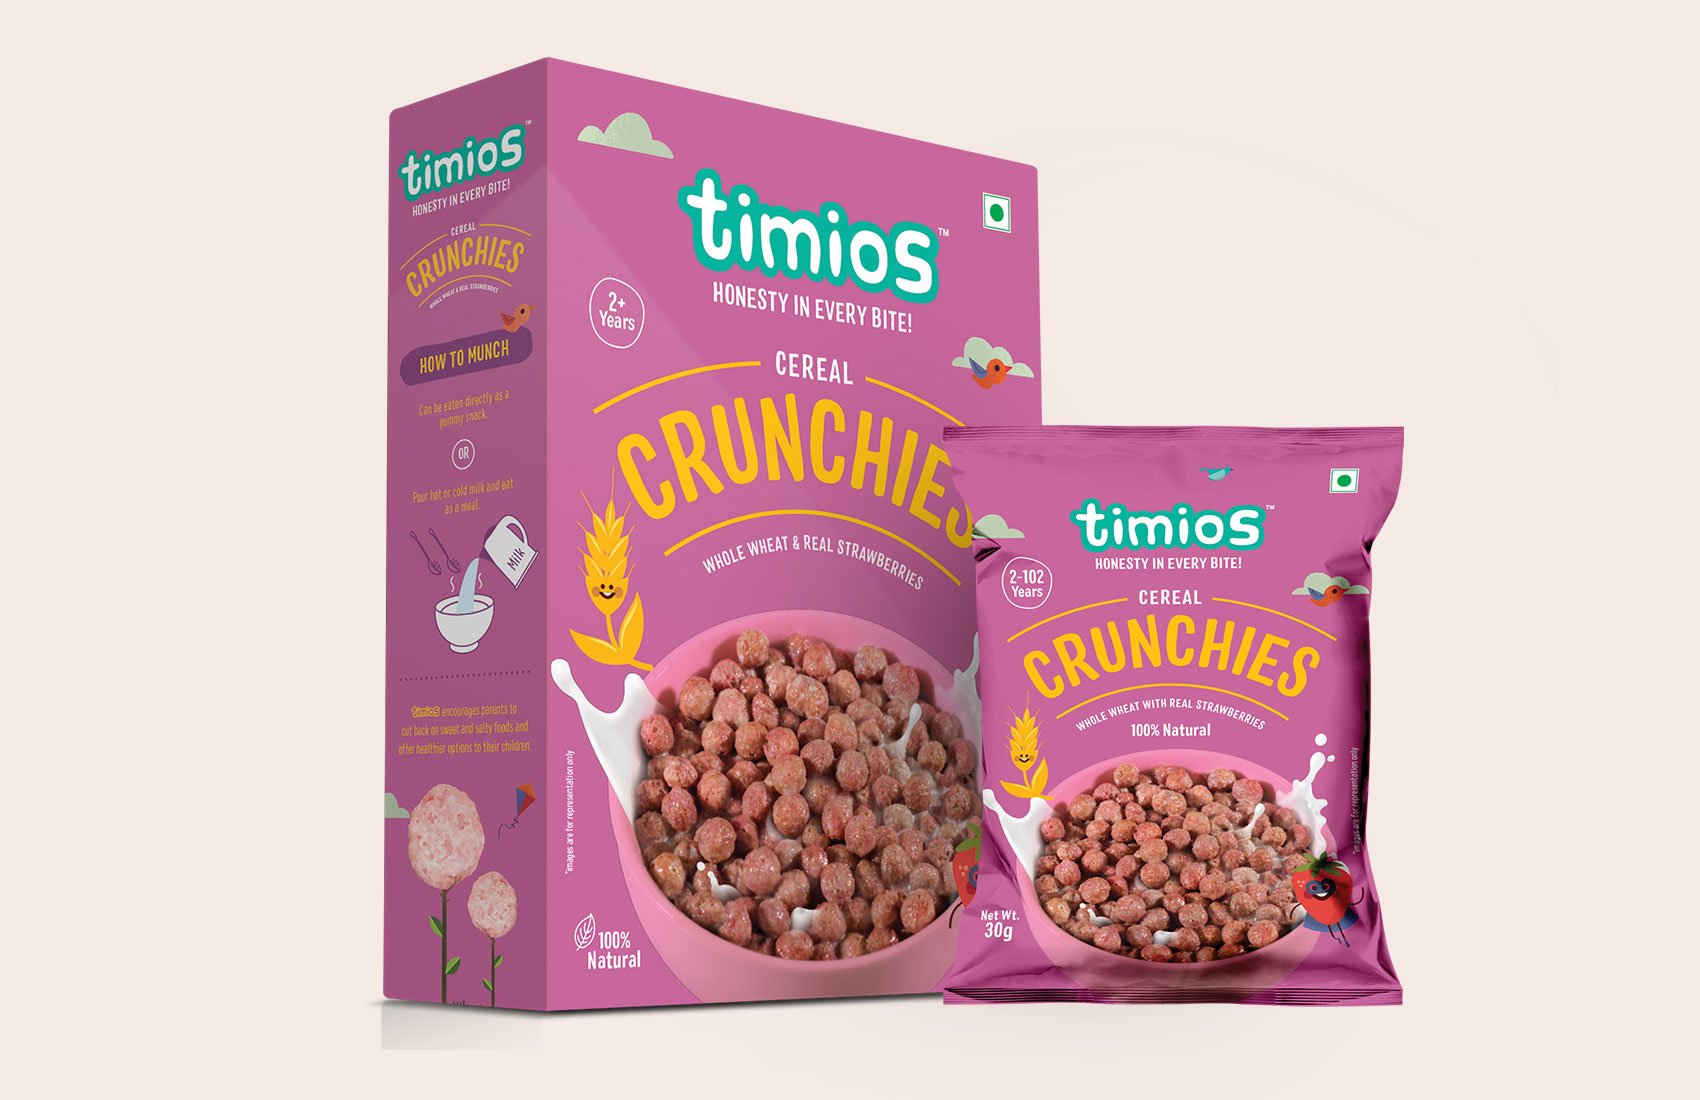 https://elebird.com/project/timios-product-packaging/